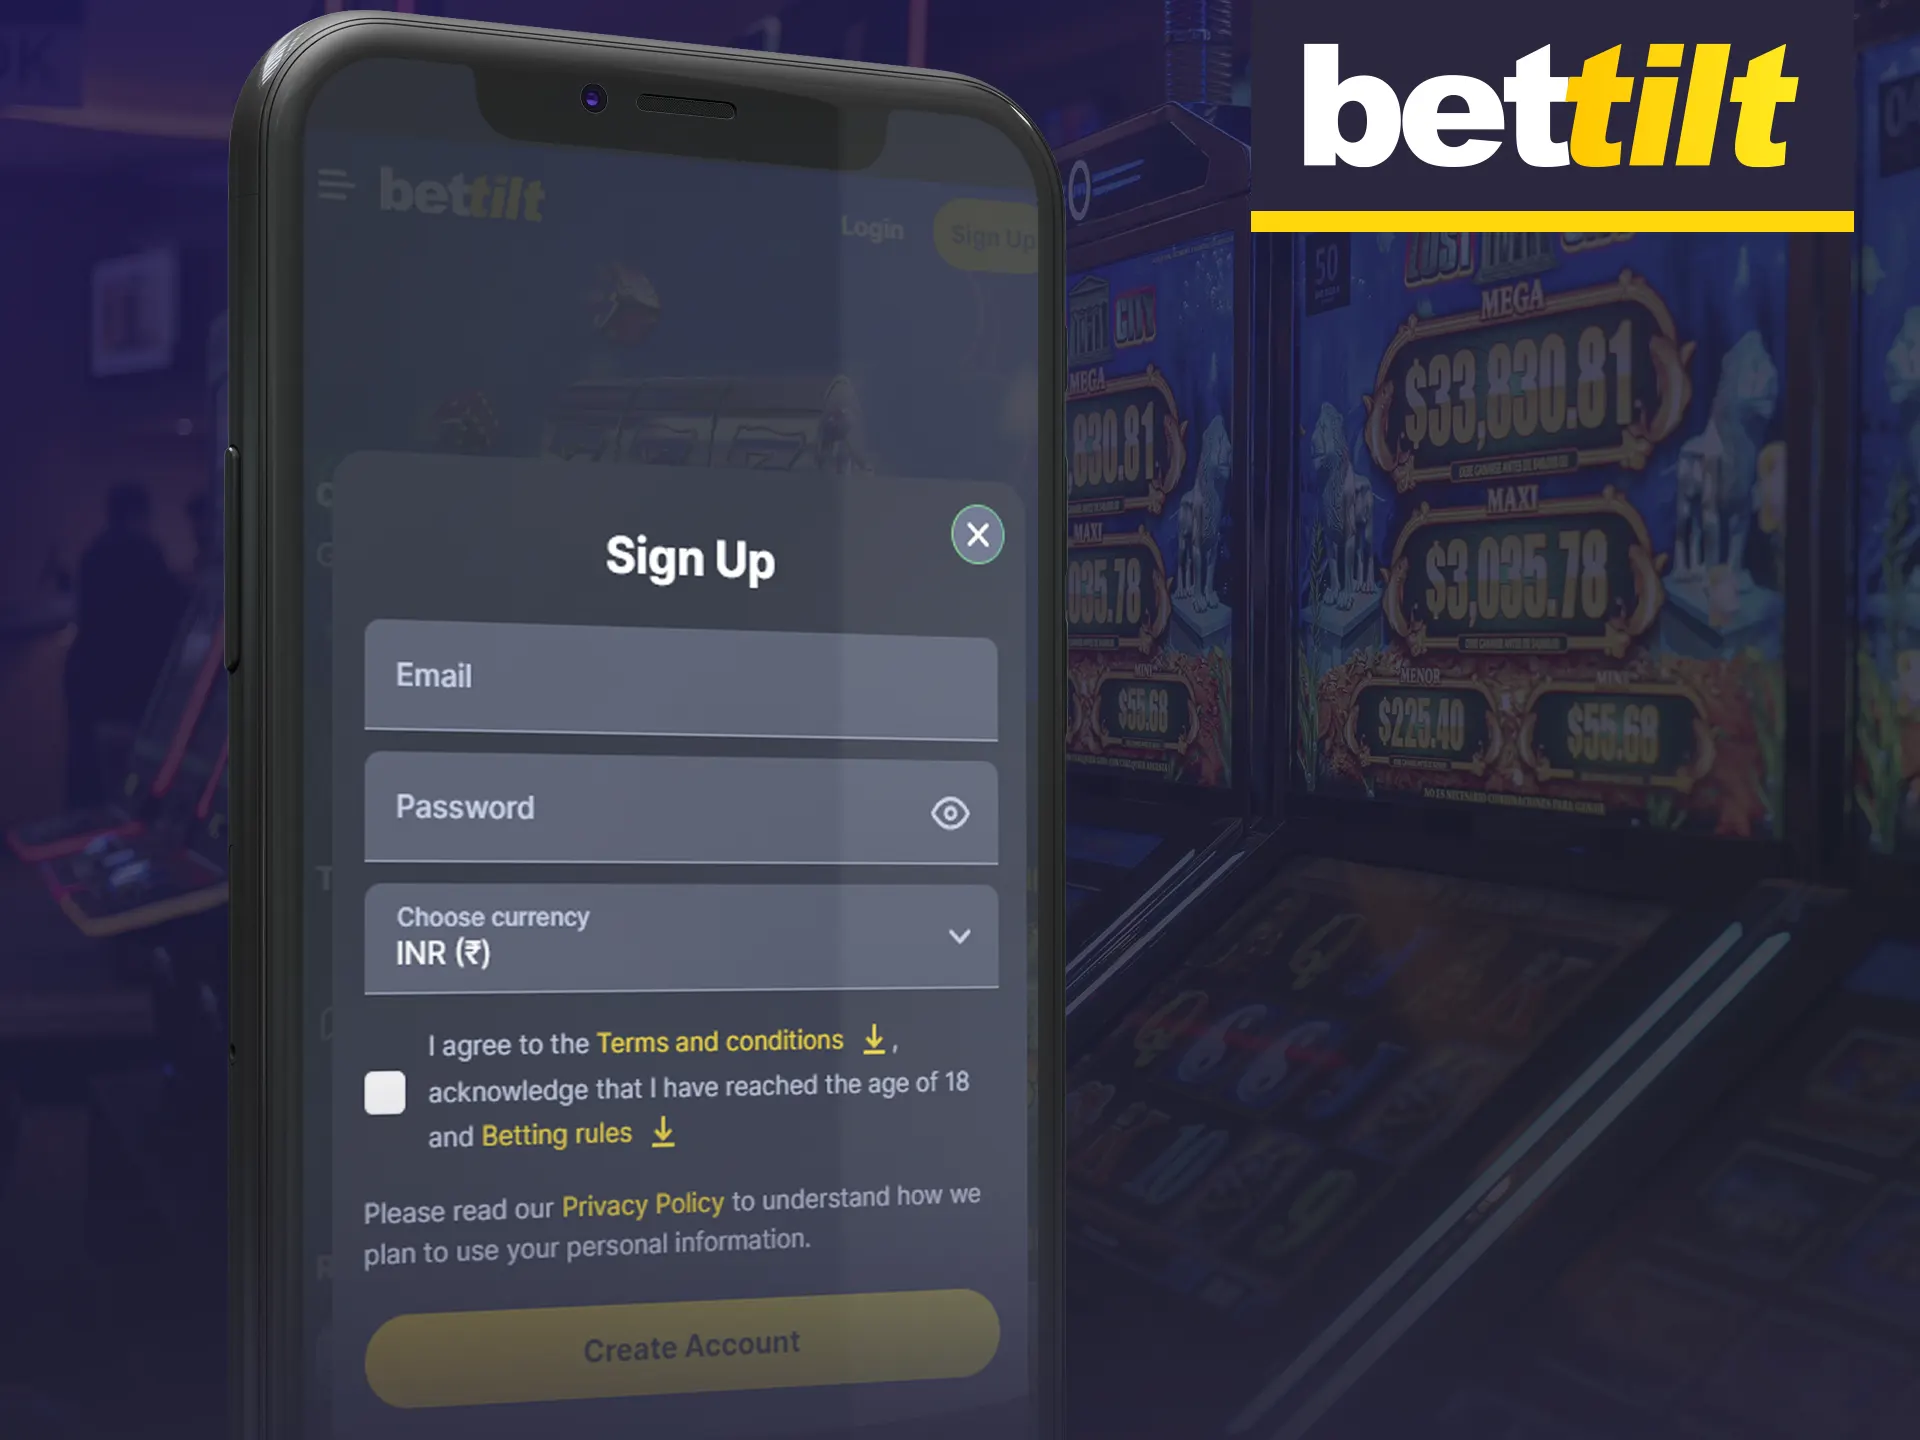 Registering with Bettilt's app grants access to games.